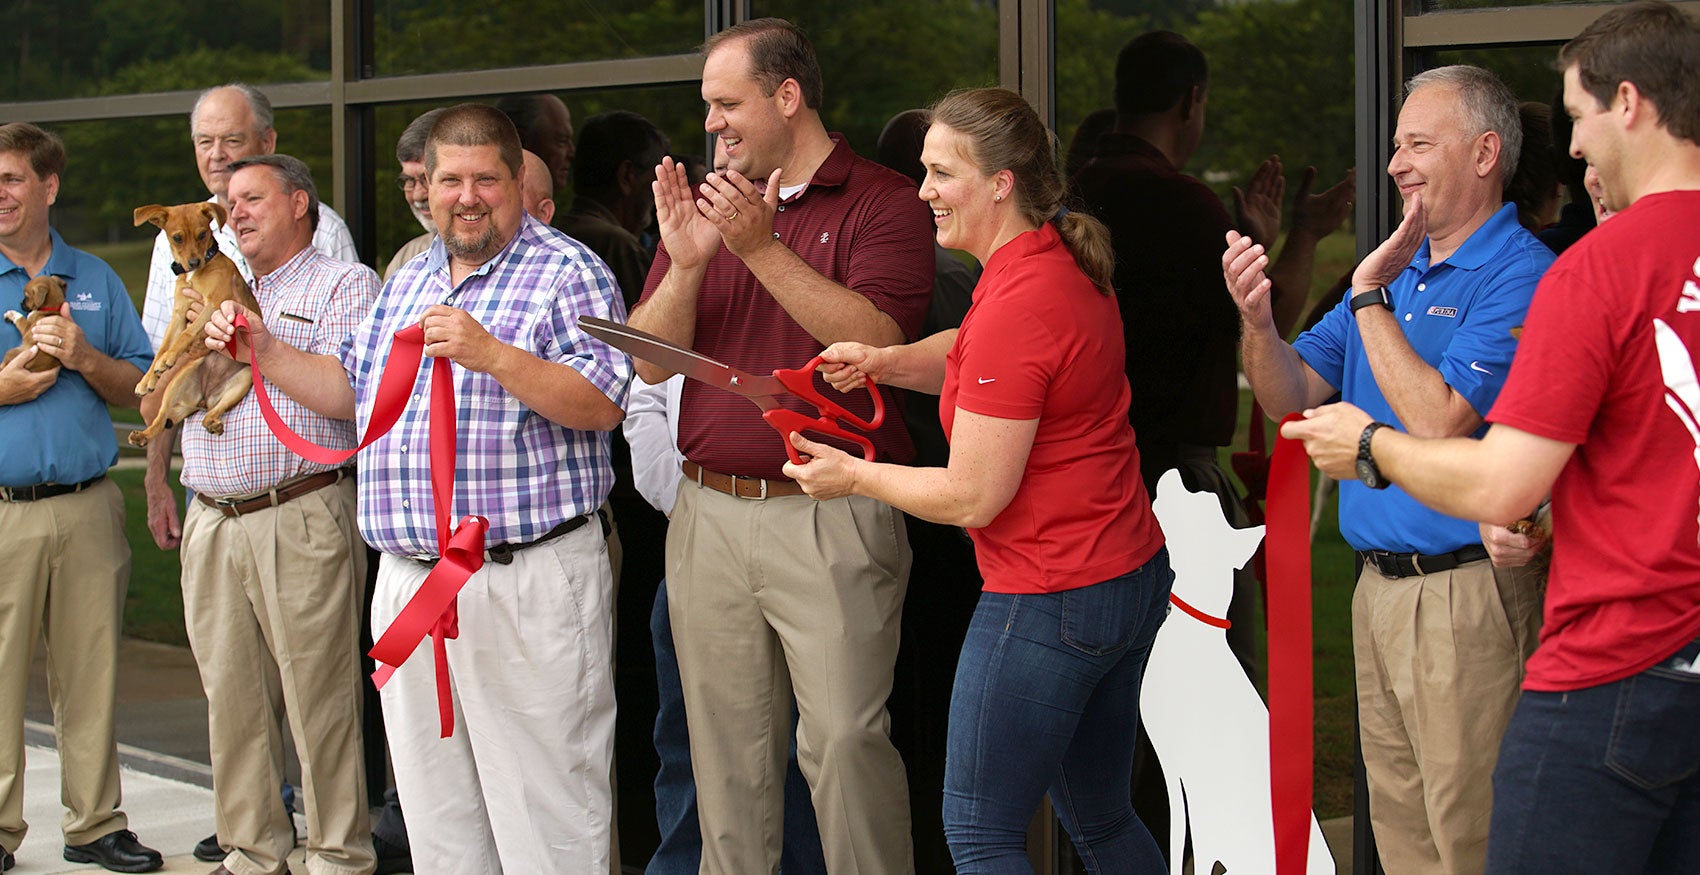 Group of people at ribbon cutting ceremony